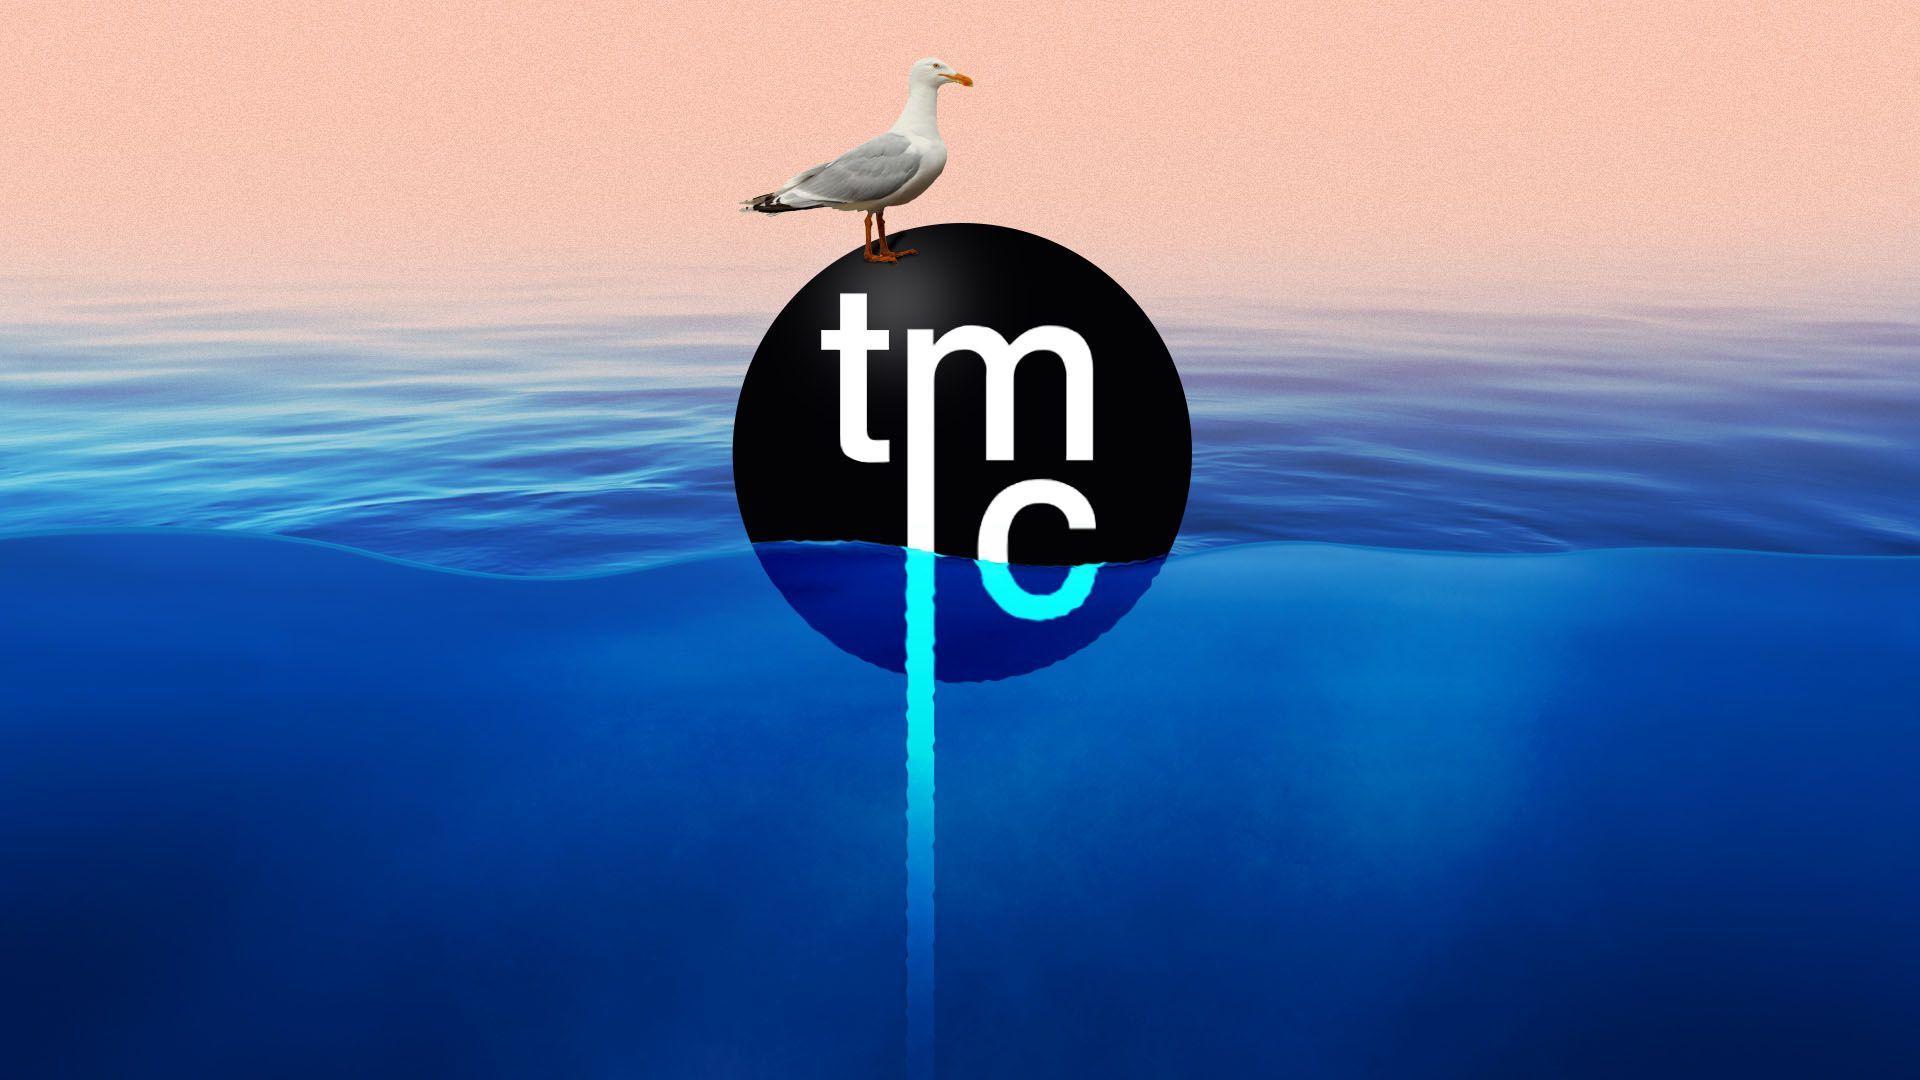 Illustration of the Metal Company logo floating in the ocean with a seagull on top of it